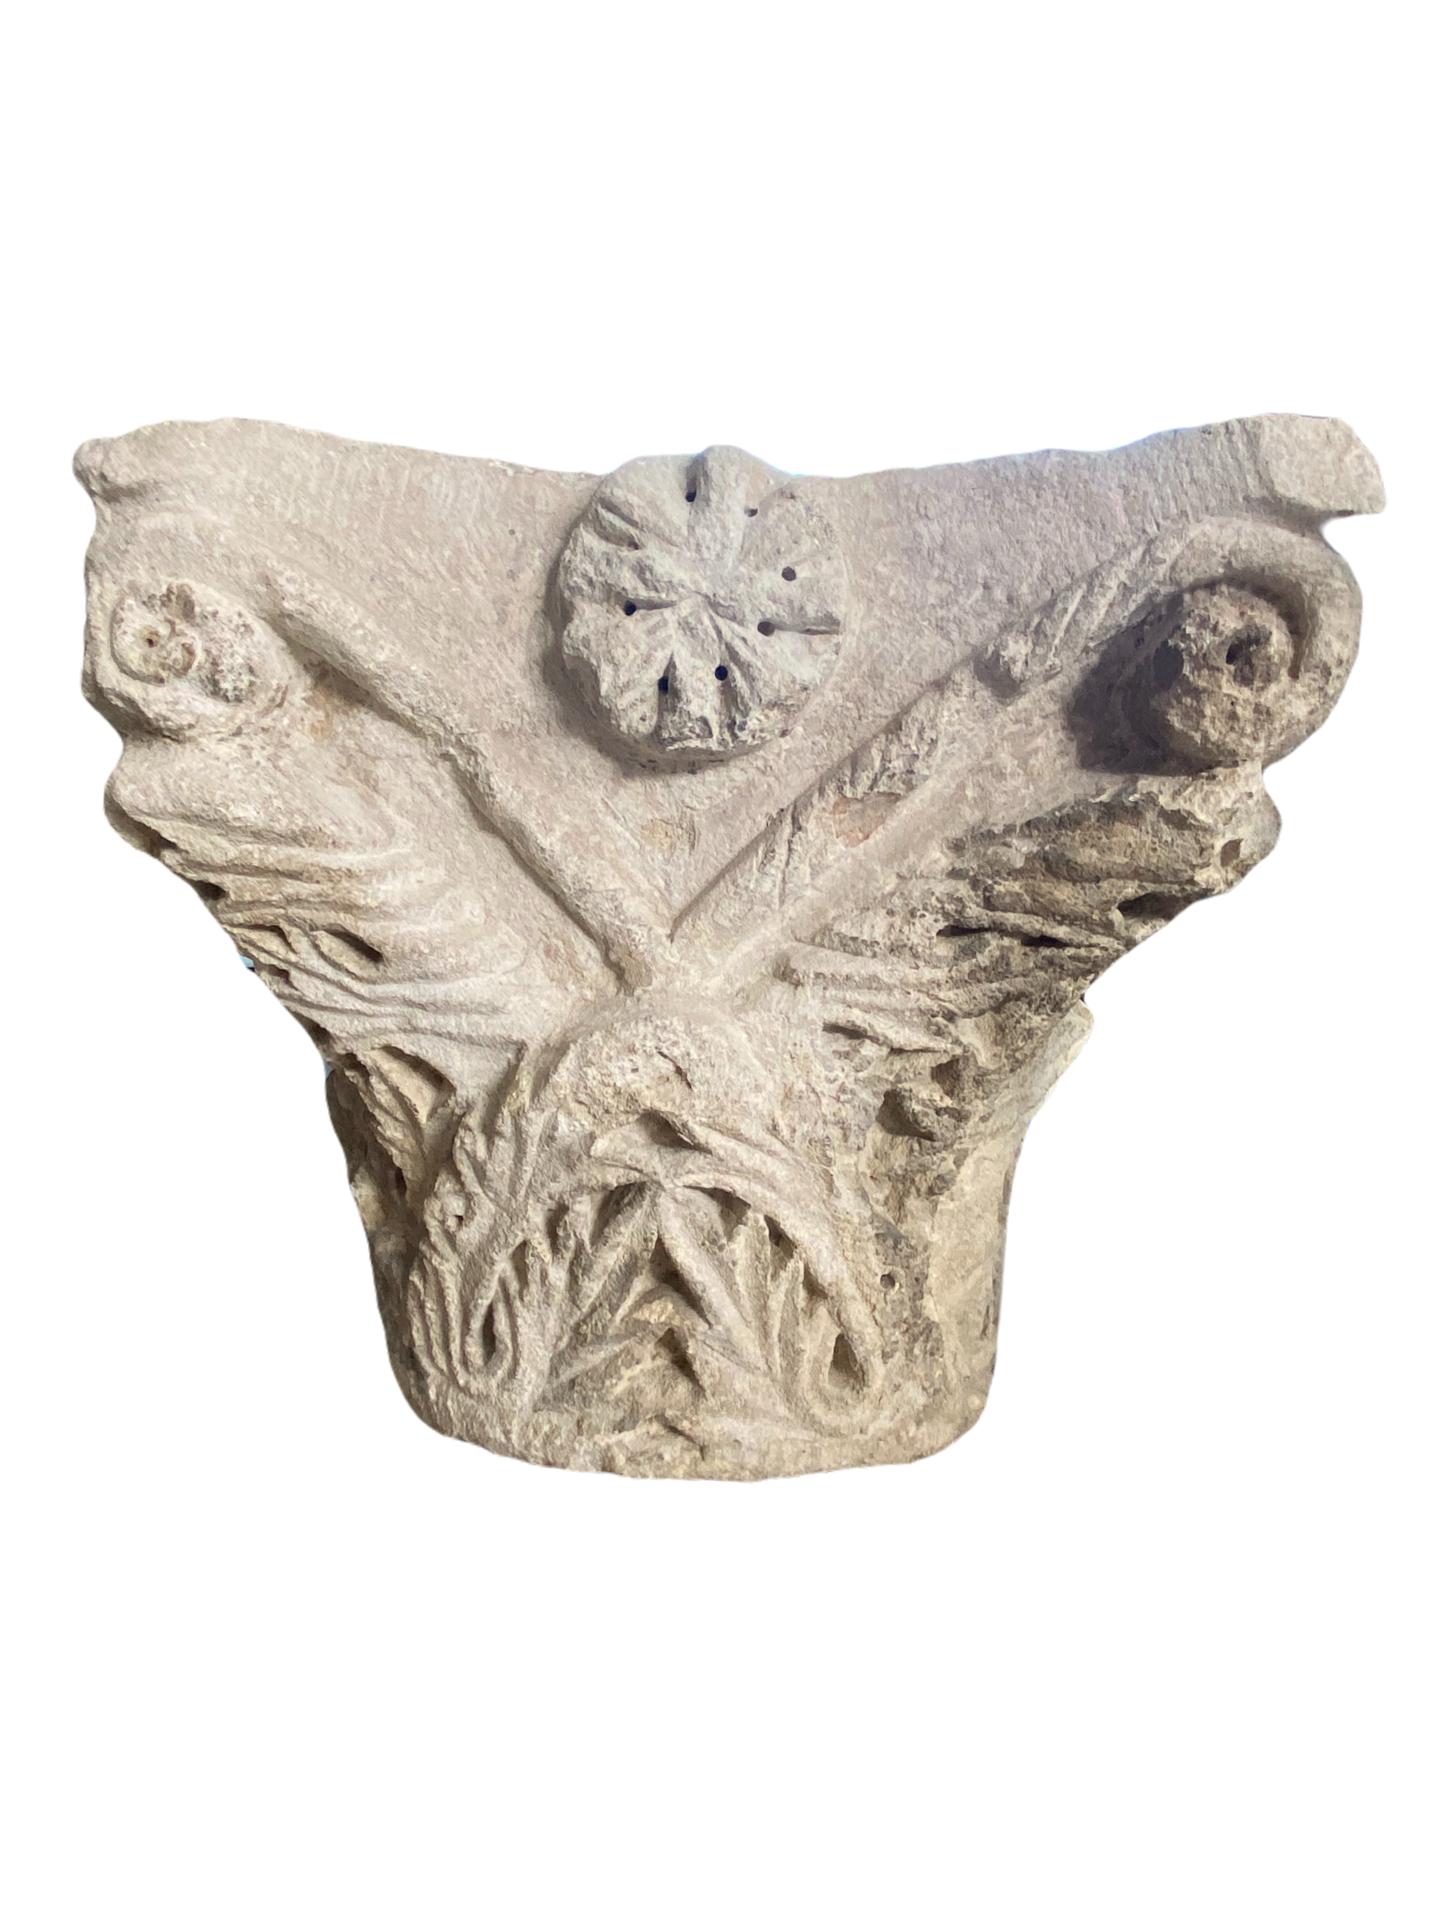 Important Romanesque capital - Medieval Sculpture by Unknown